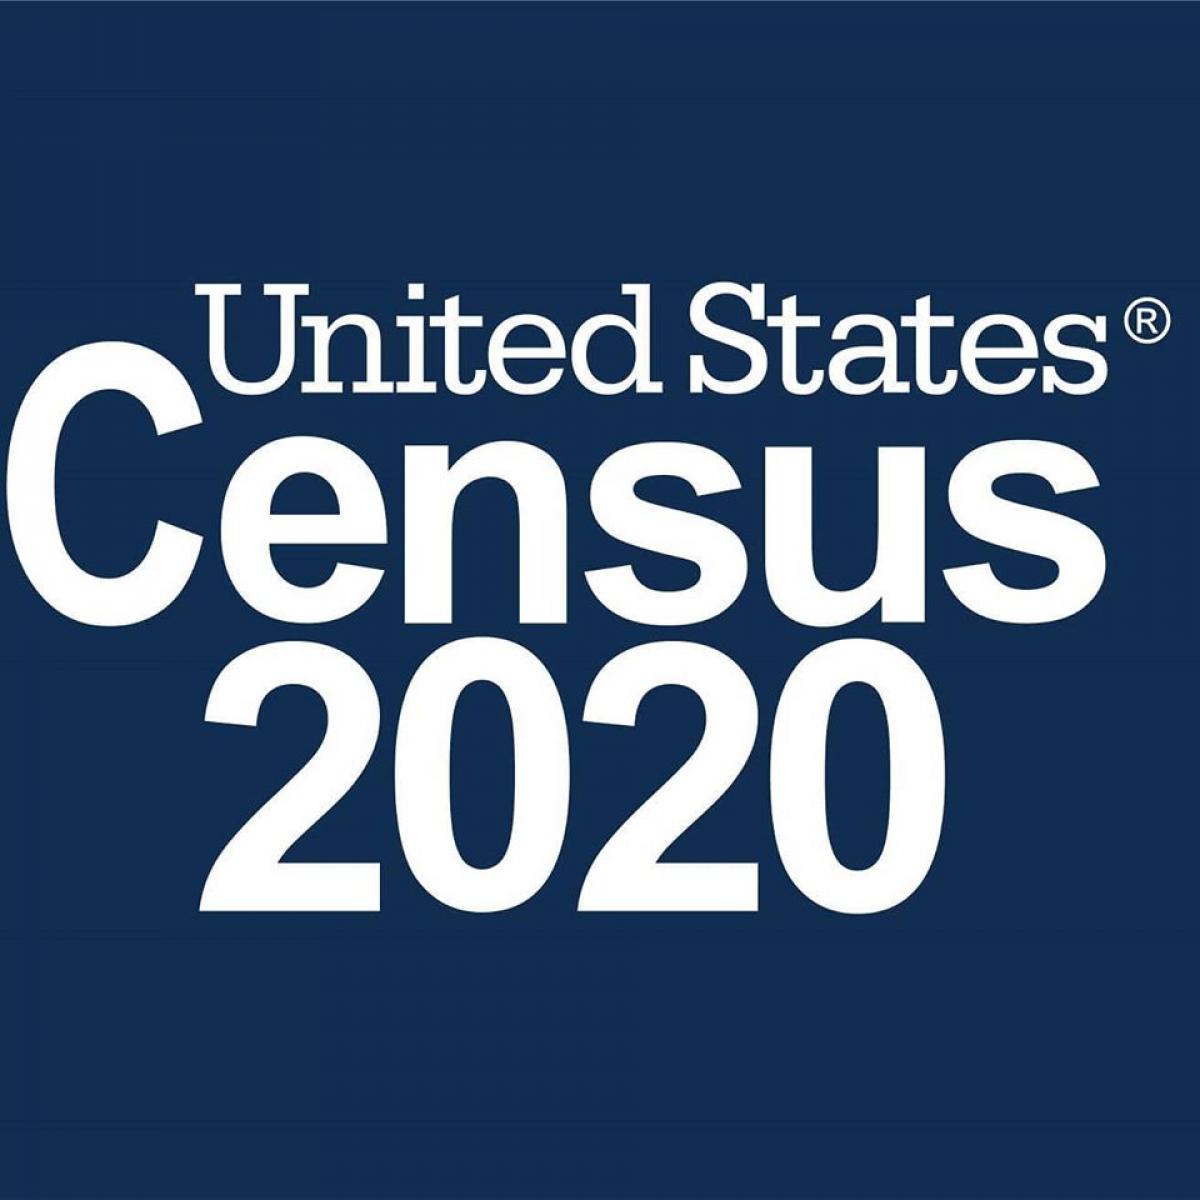 The City of Miami Springs is #5 in the County in Response Rate for the 2020 Census